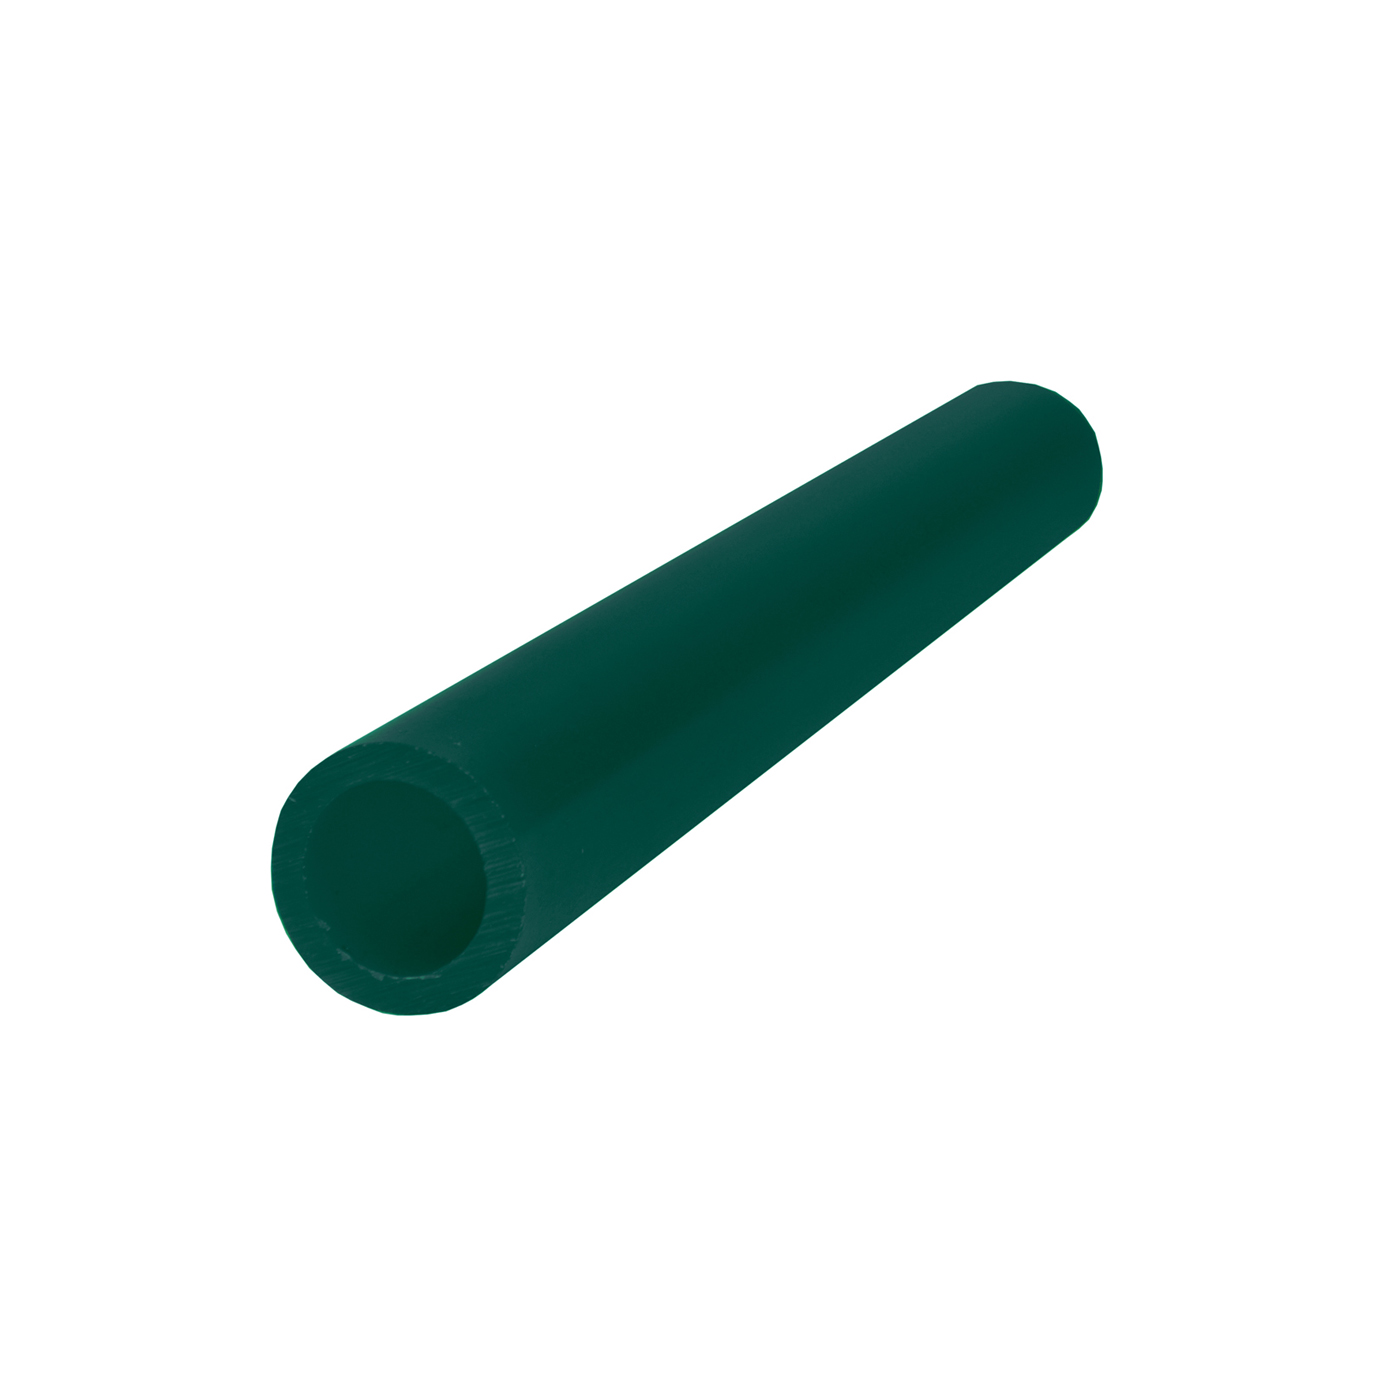 Filing/Milling Wax Round Profile, Very Hard, Green,Cent.Hole - 1 piece